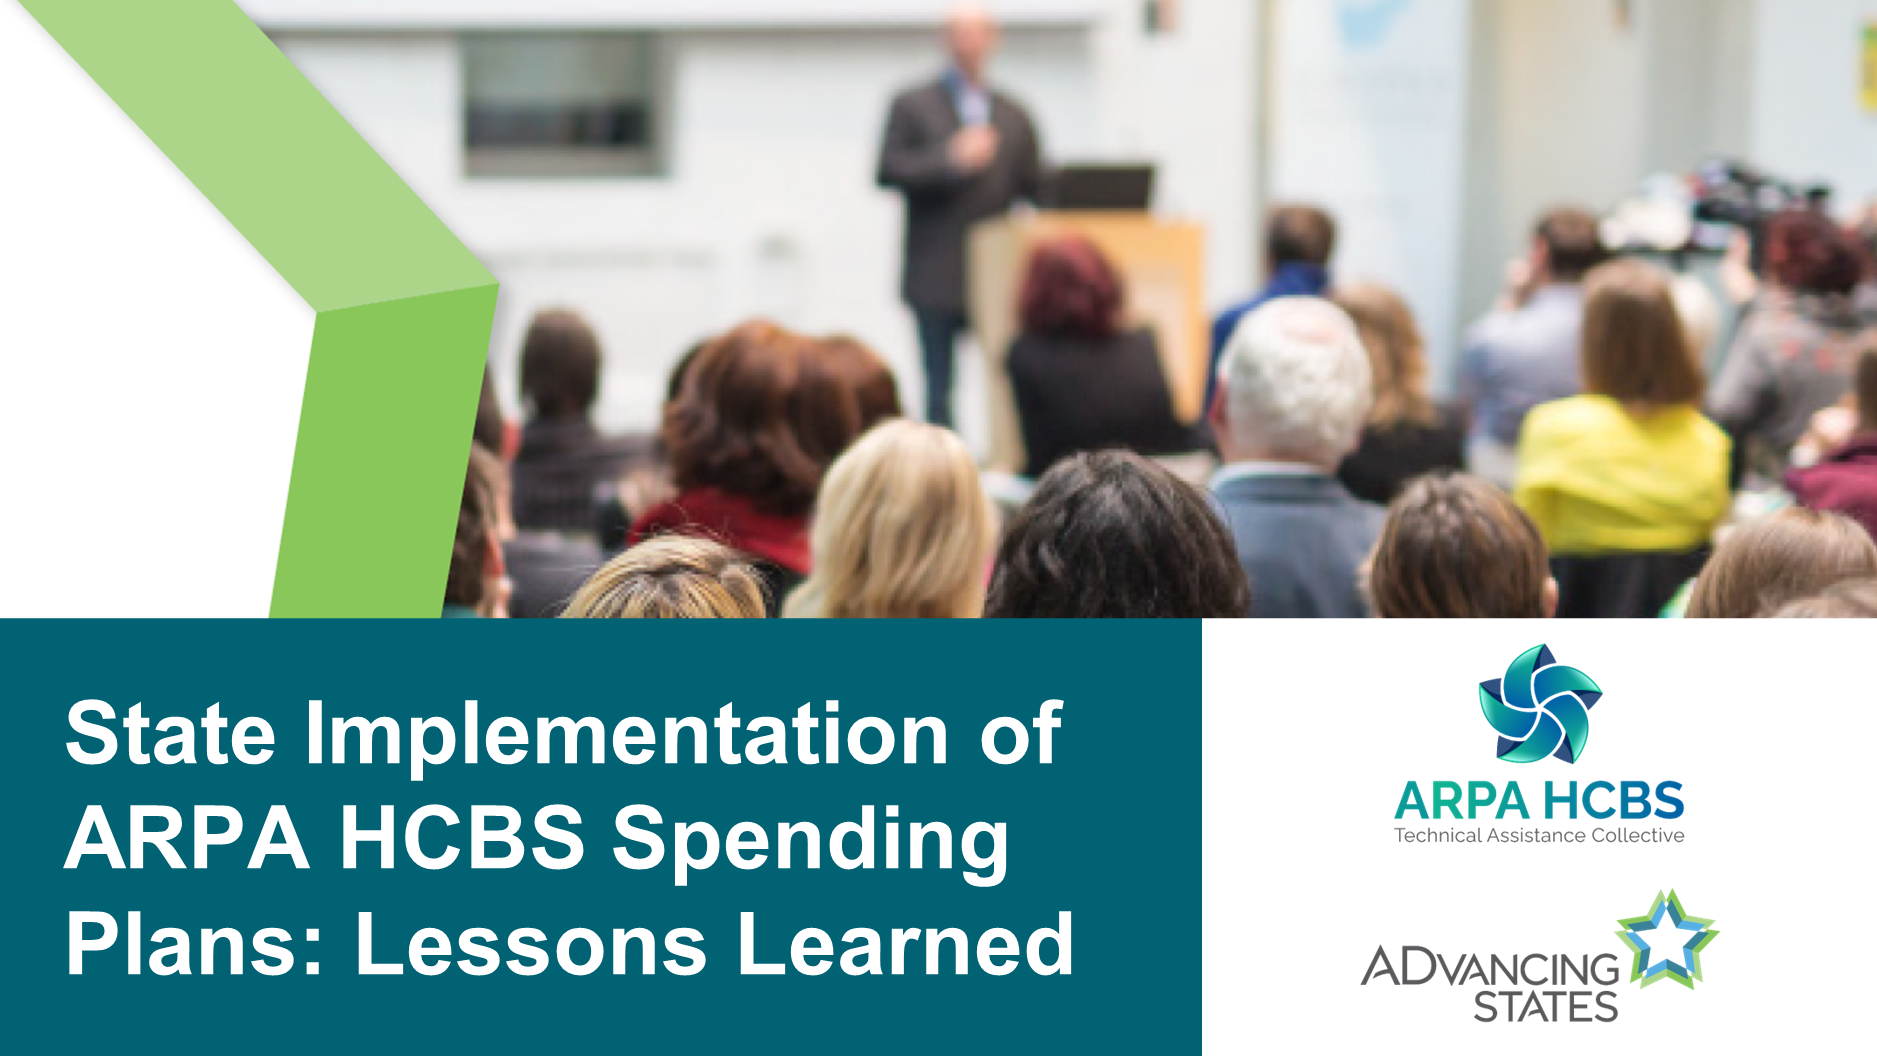 State Implementation of ARPA HCBS Spending Plans:  Lessons Learned 